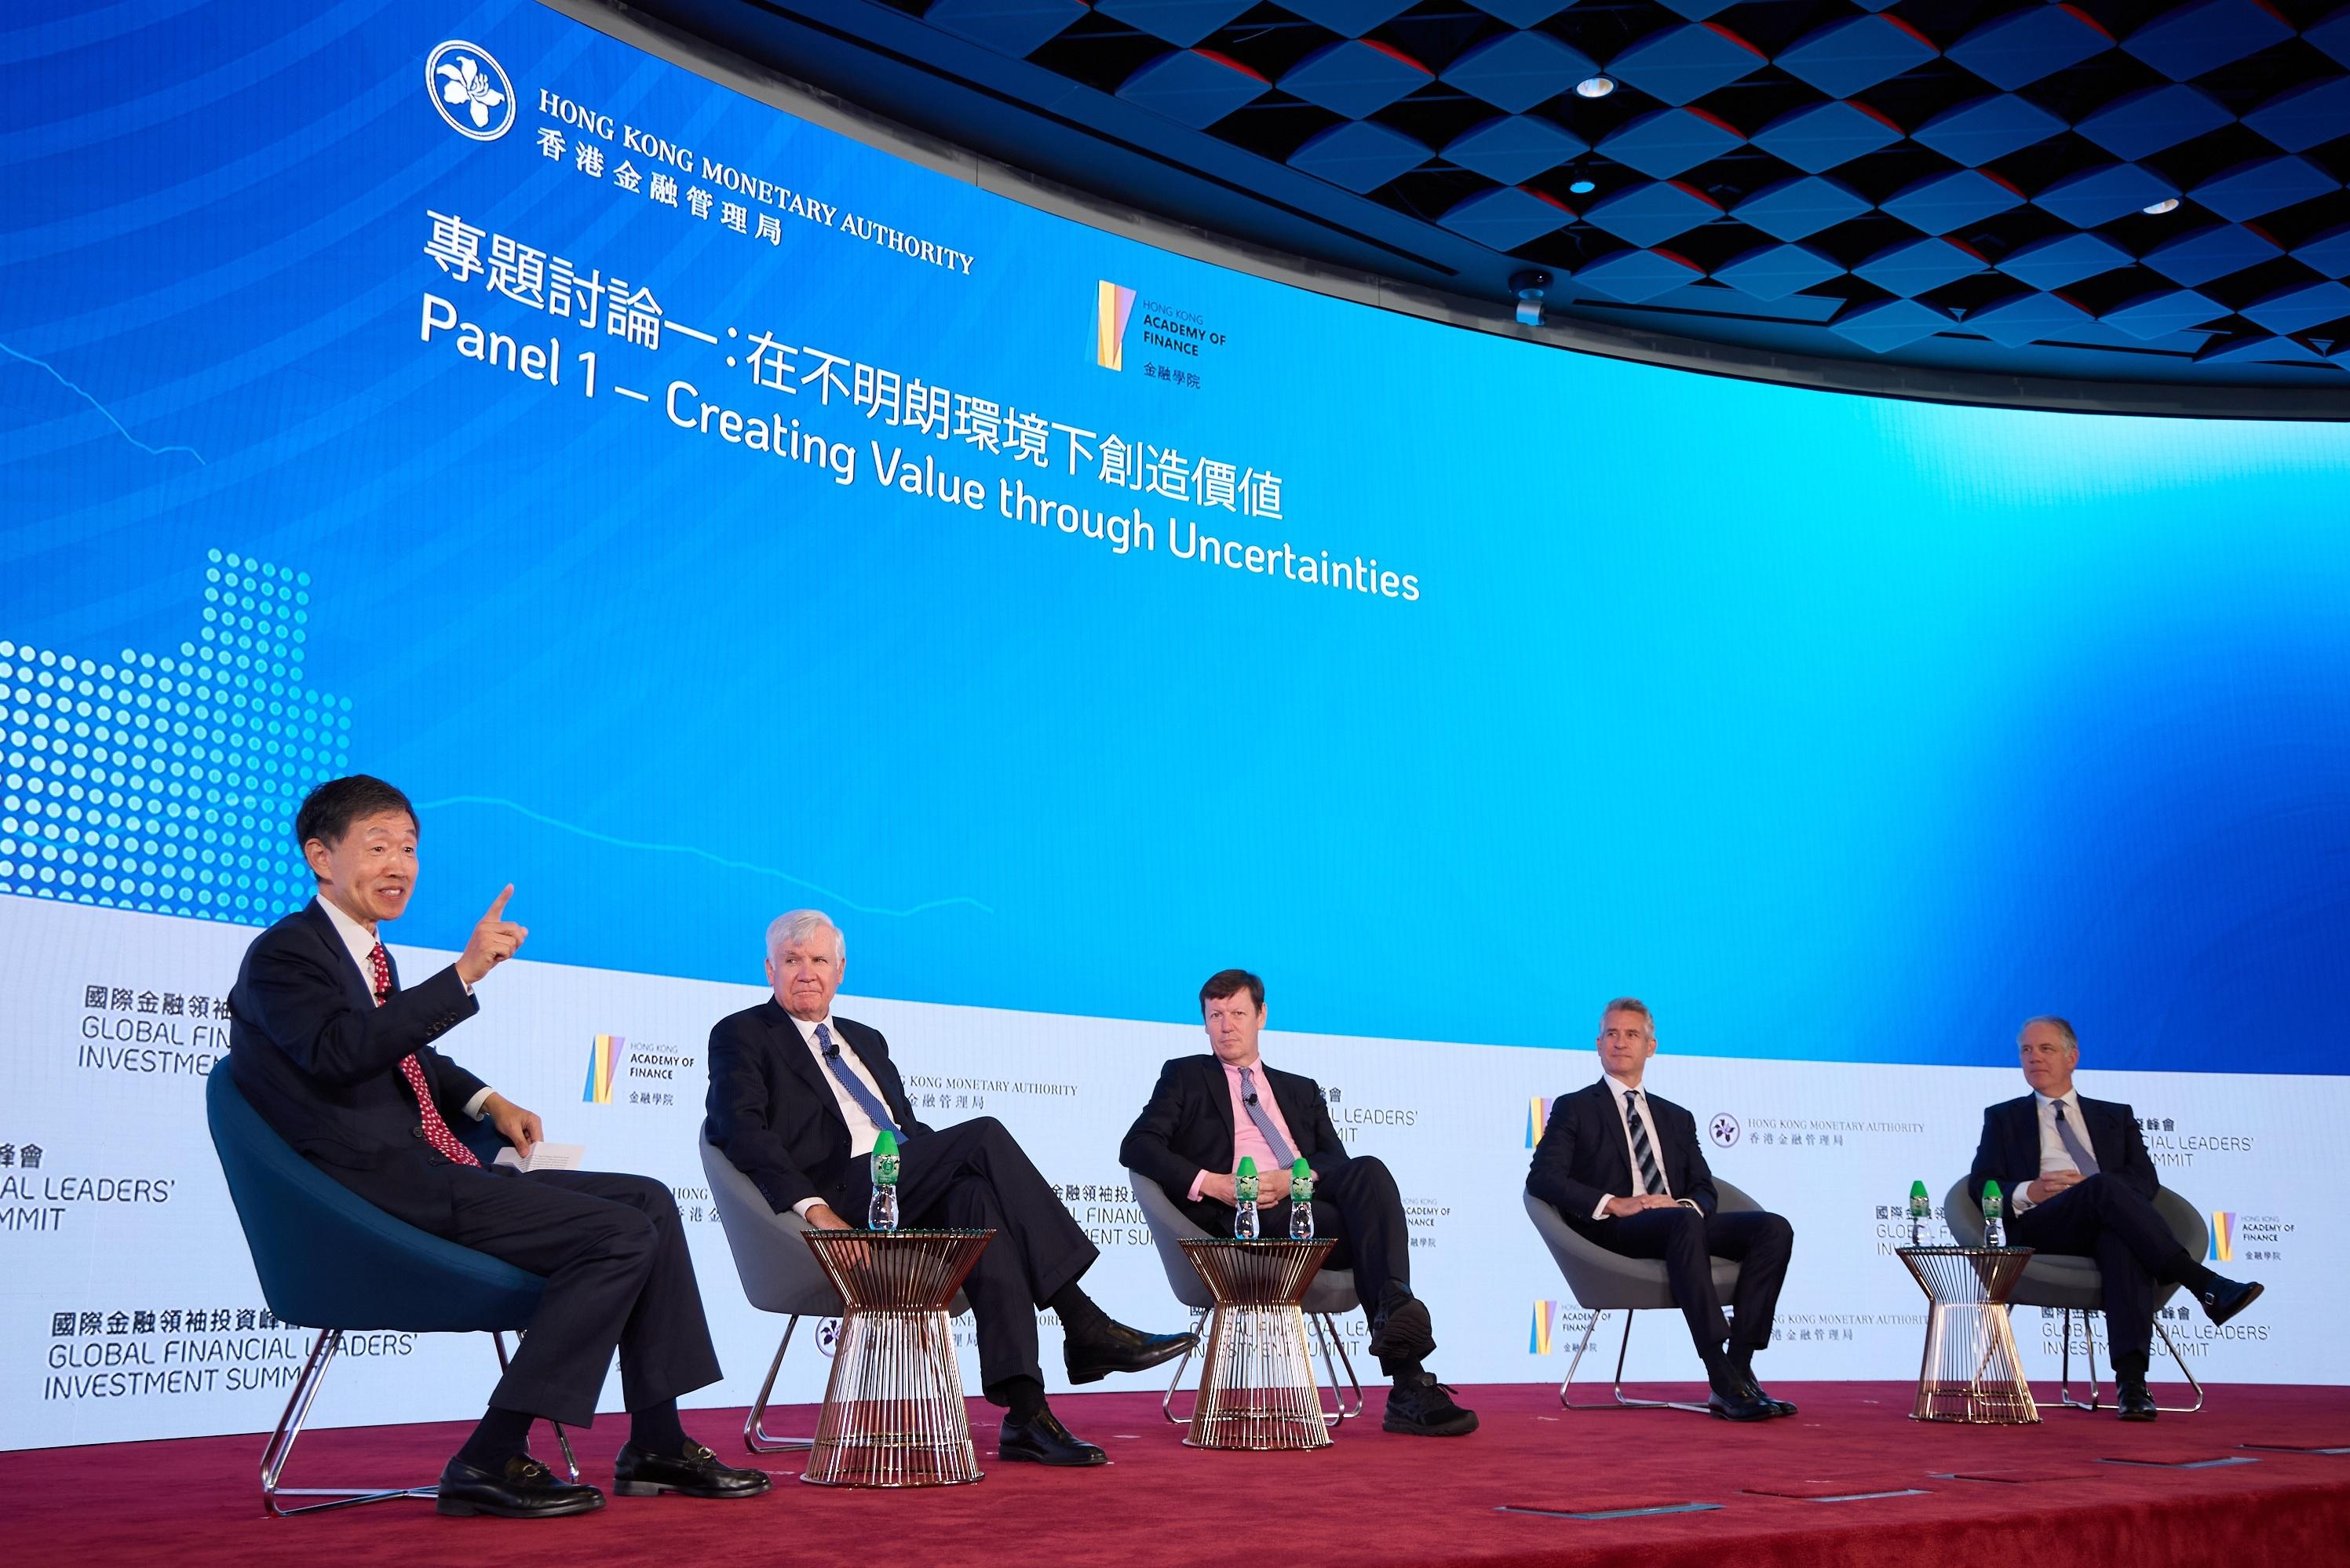 In the first panel discussion at the "Conversations with Global Investors" seminar of the Global Financial Leaders' Investment Summit today (November 3), (from left) Executive Chairman of PAG Mr Shan Weijan; Co-Founder, Interim CEO, and Co-Chairman of Carlyle Mr William E. Conway, Jr.; CEO of Man Group Mr Luke Ellis; Group Head of Macquarie Asset Management Mr Ben Way; and Co-President of Apollo Asset Management Mr Jim Zelter, share their views on how to create value through uncertainties.